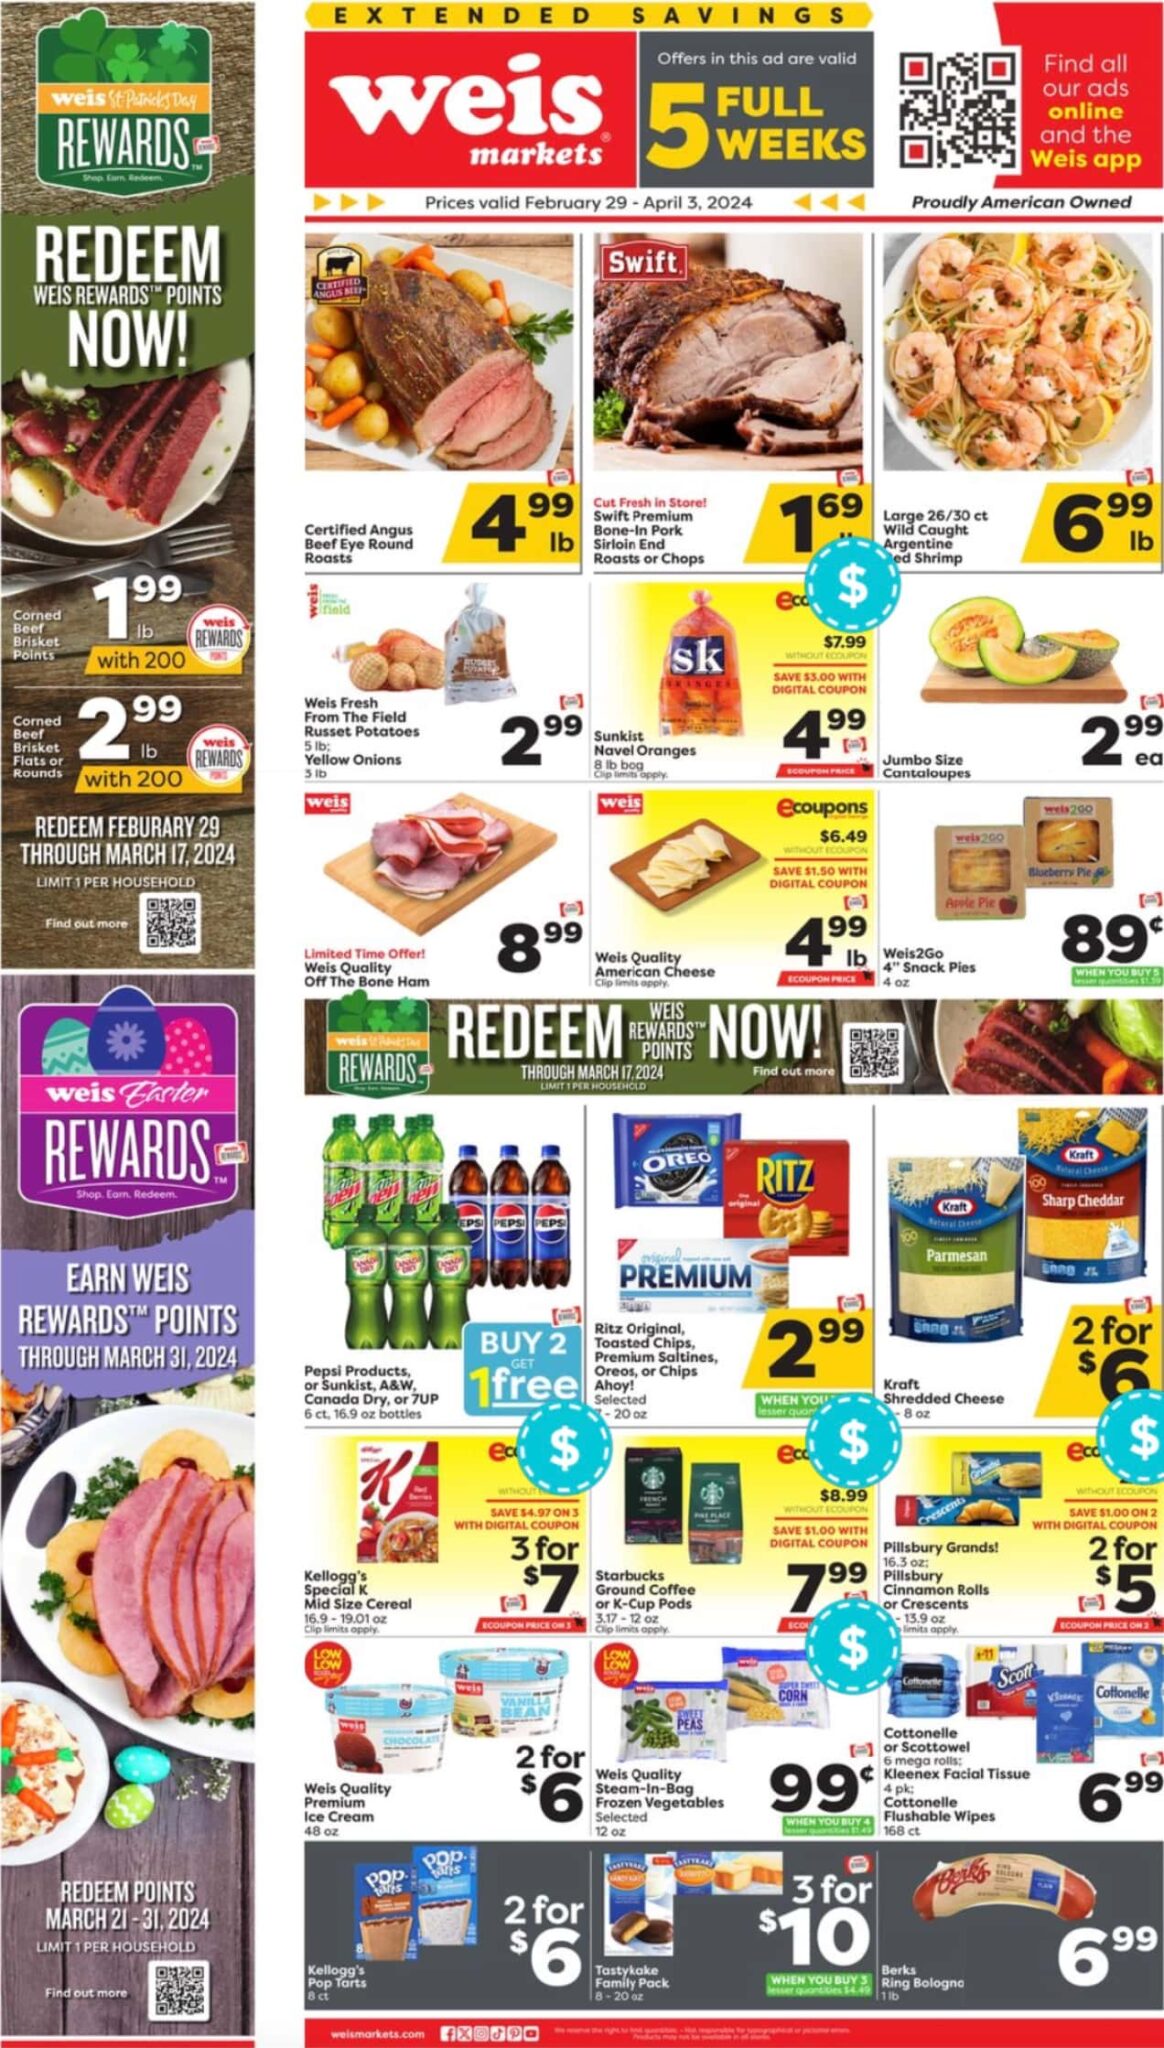 Weis Markets Weekly Ad February 29 – April 3, 2024